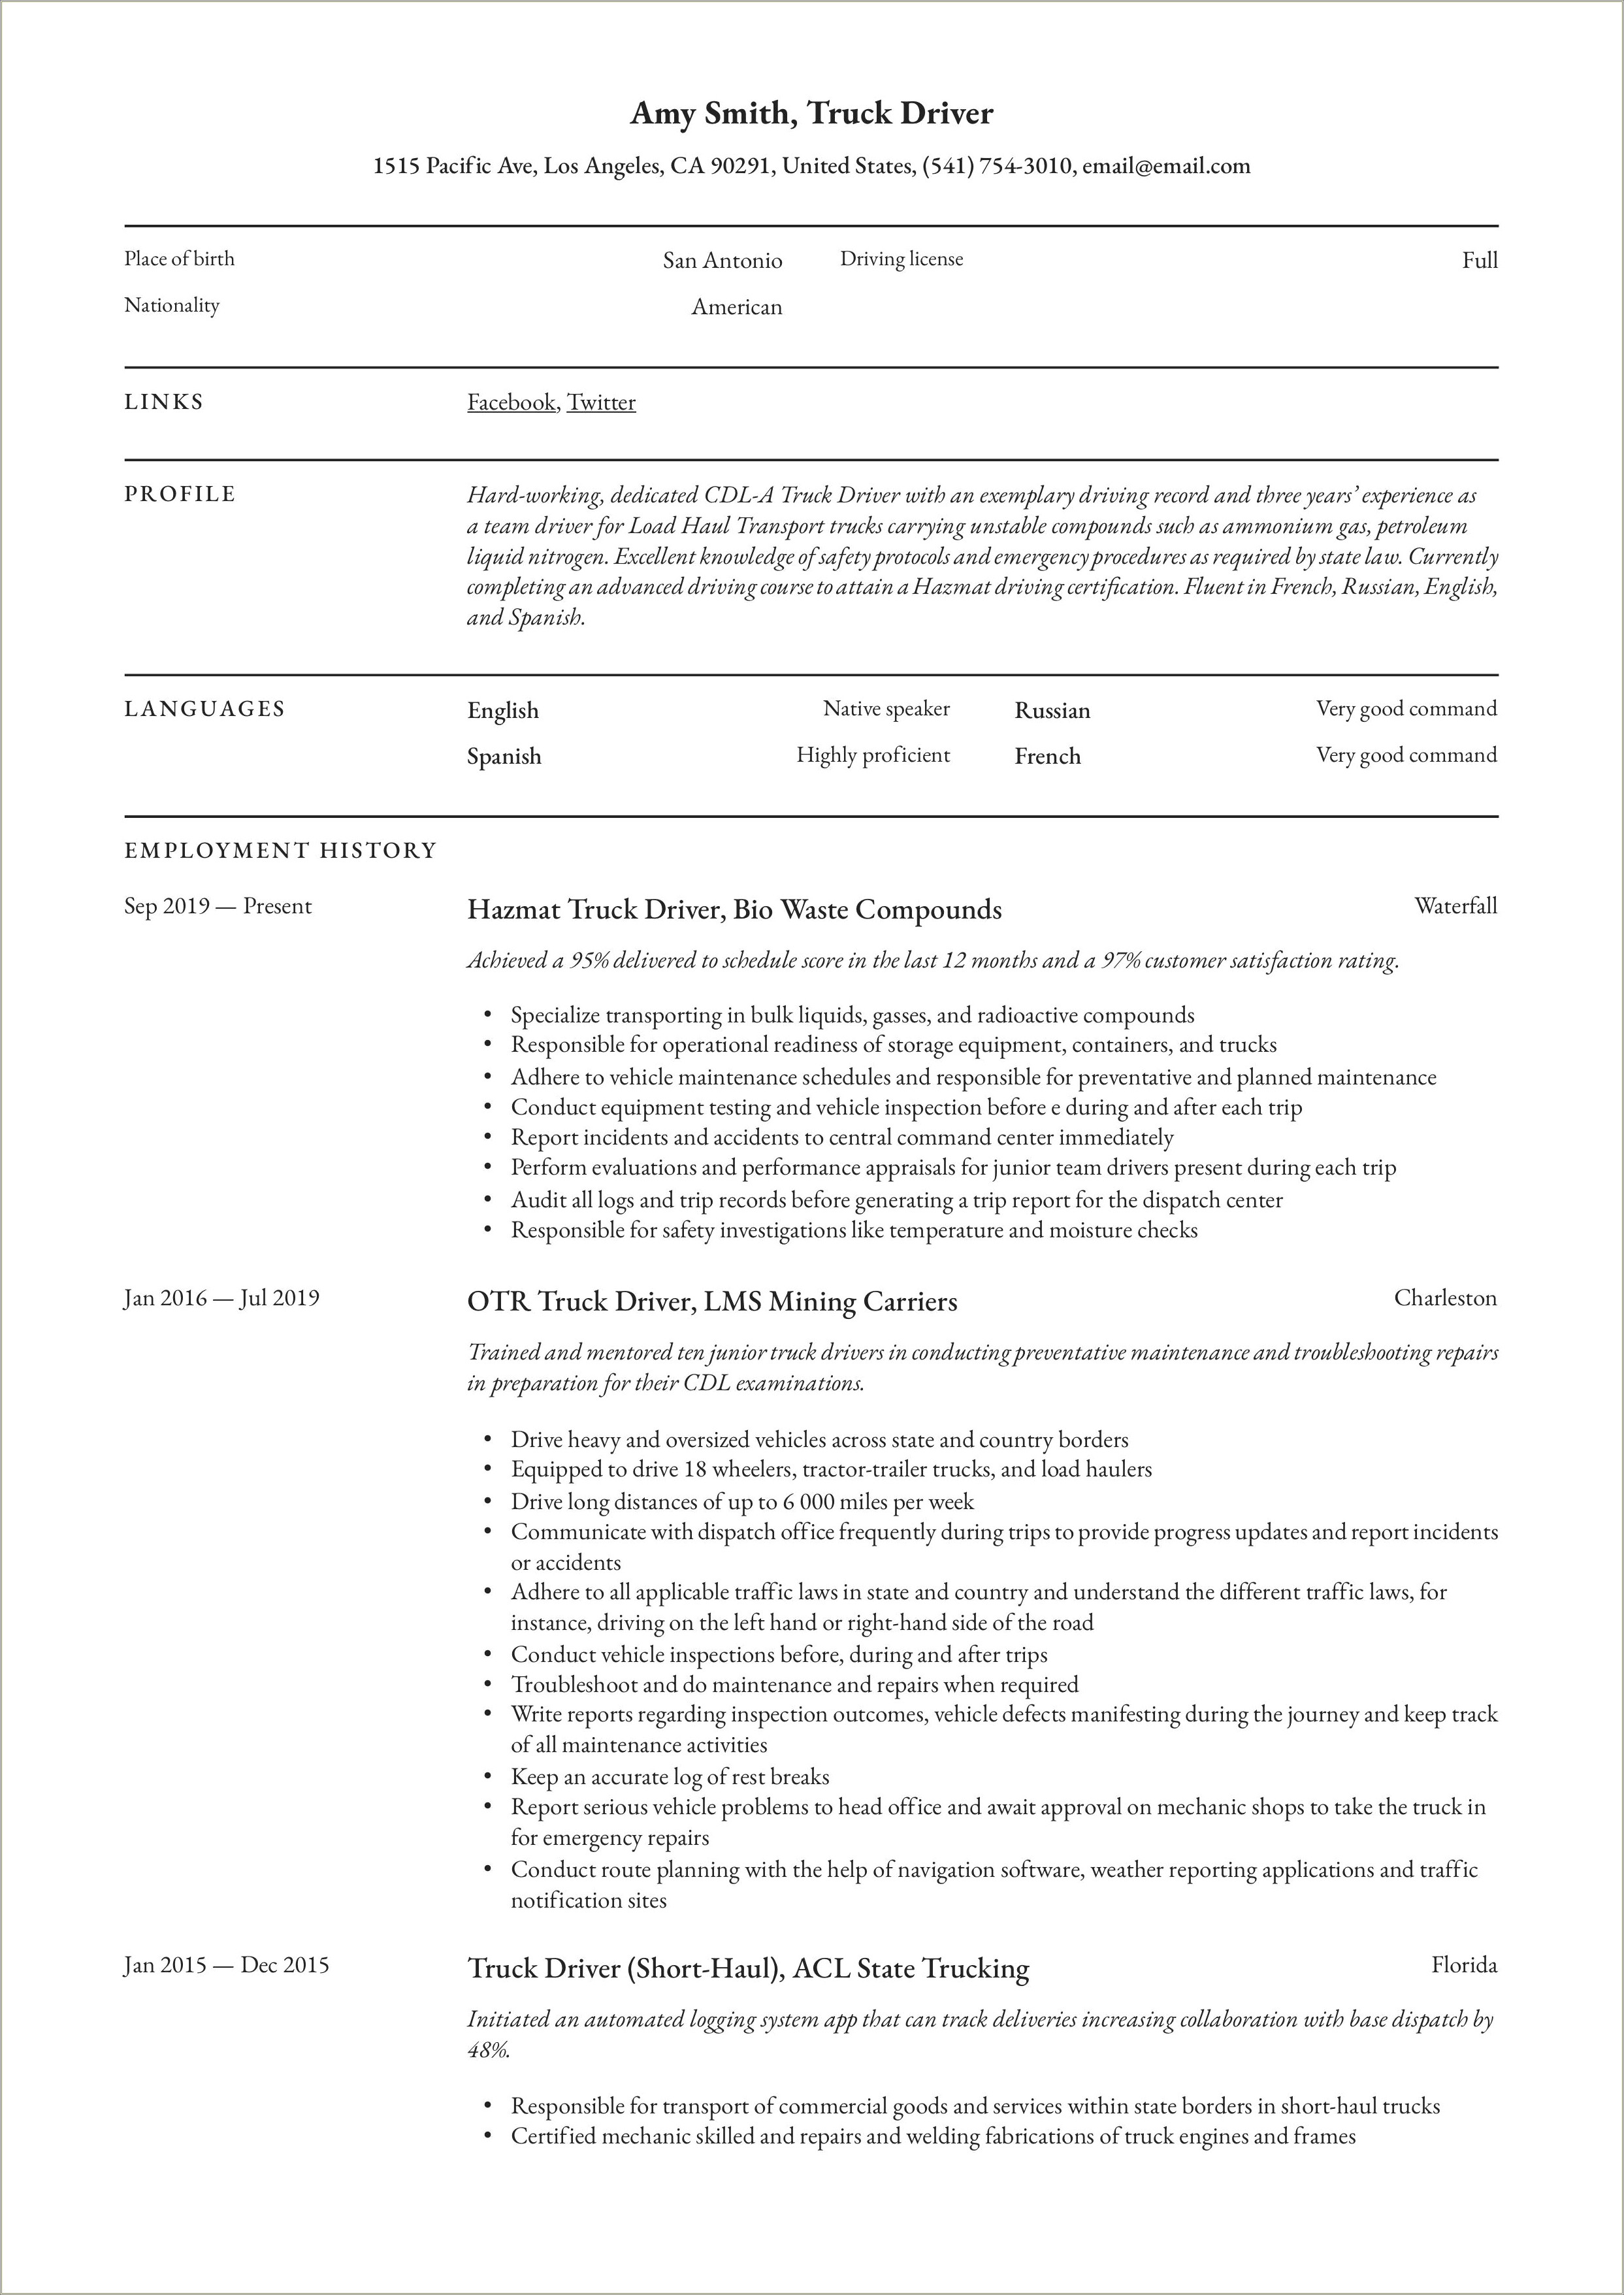 Sample Resumes For Truck Driving Jobs